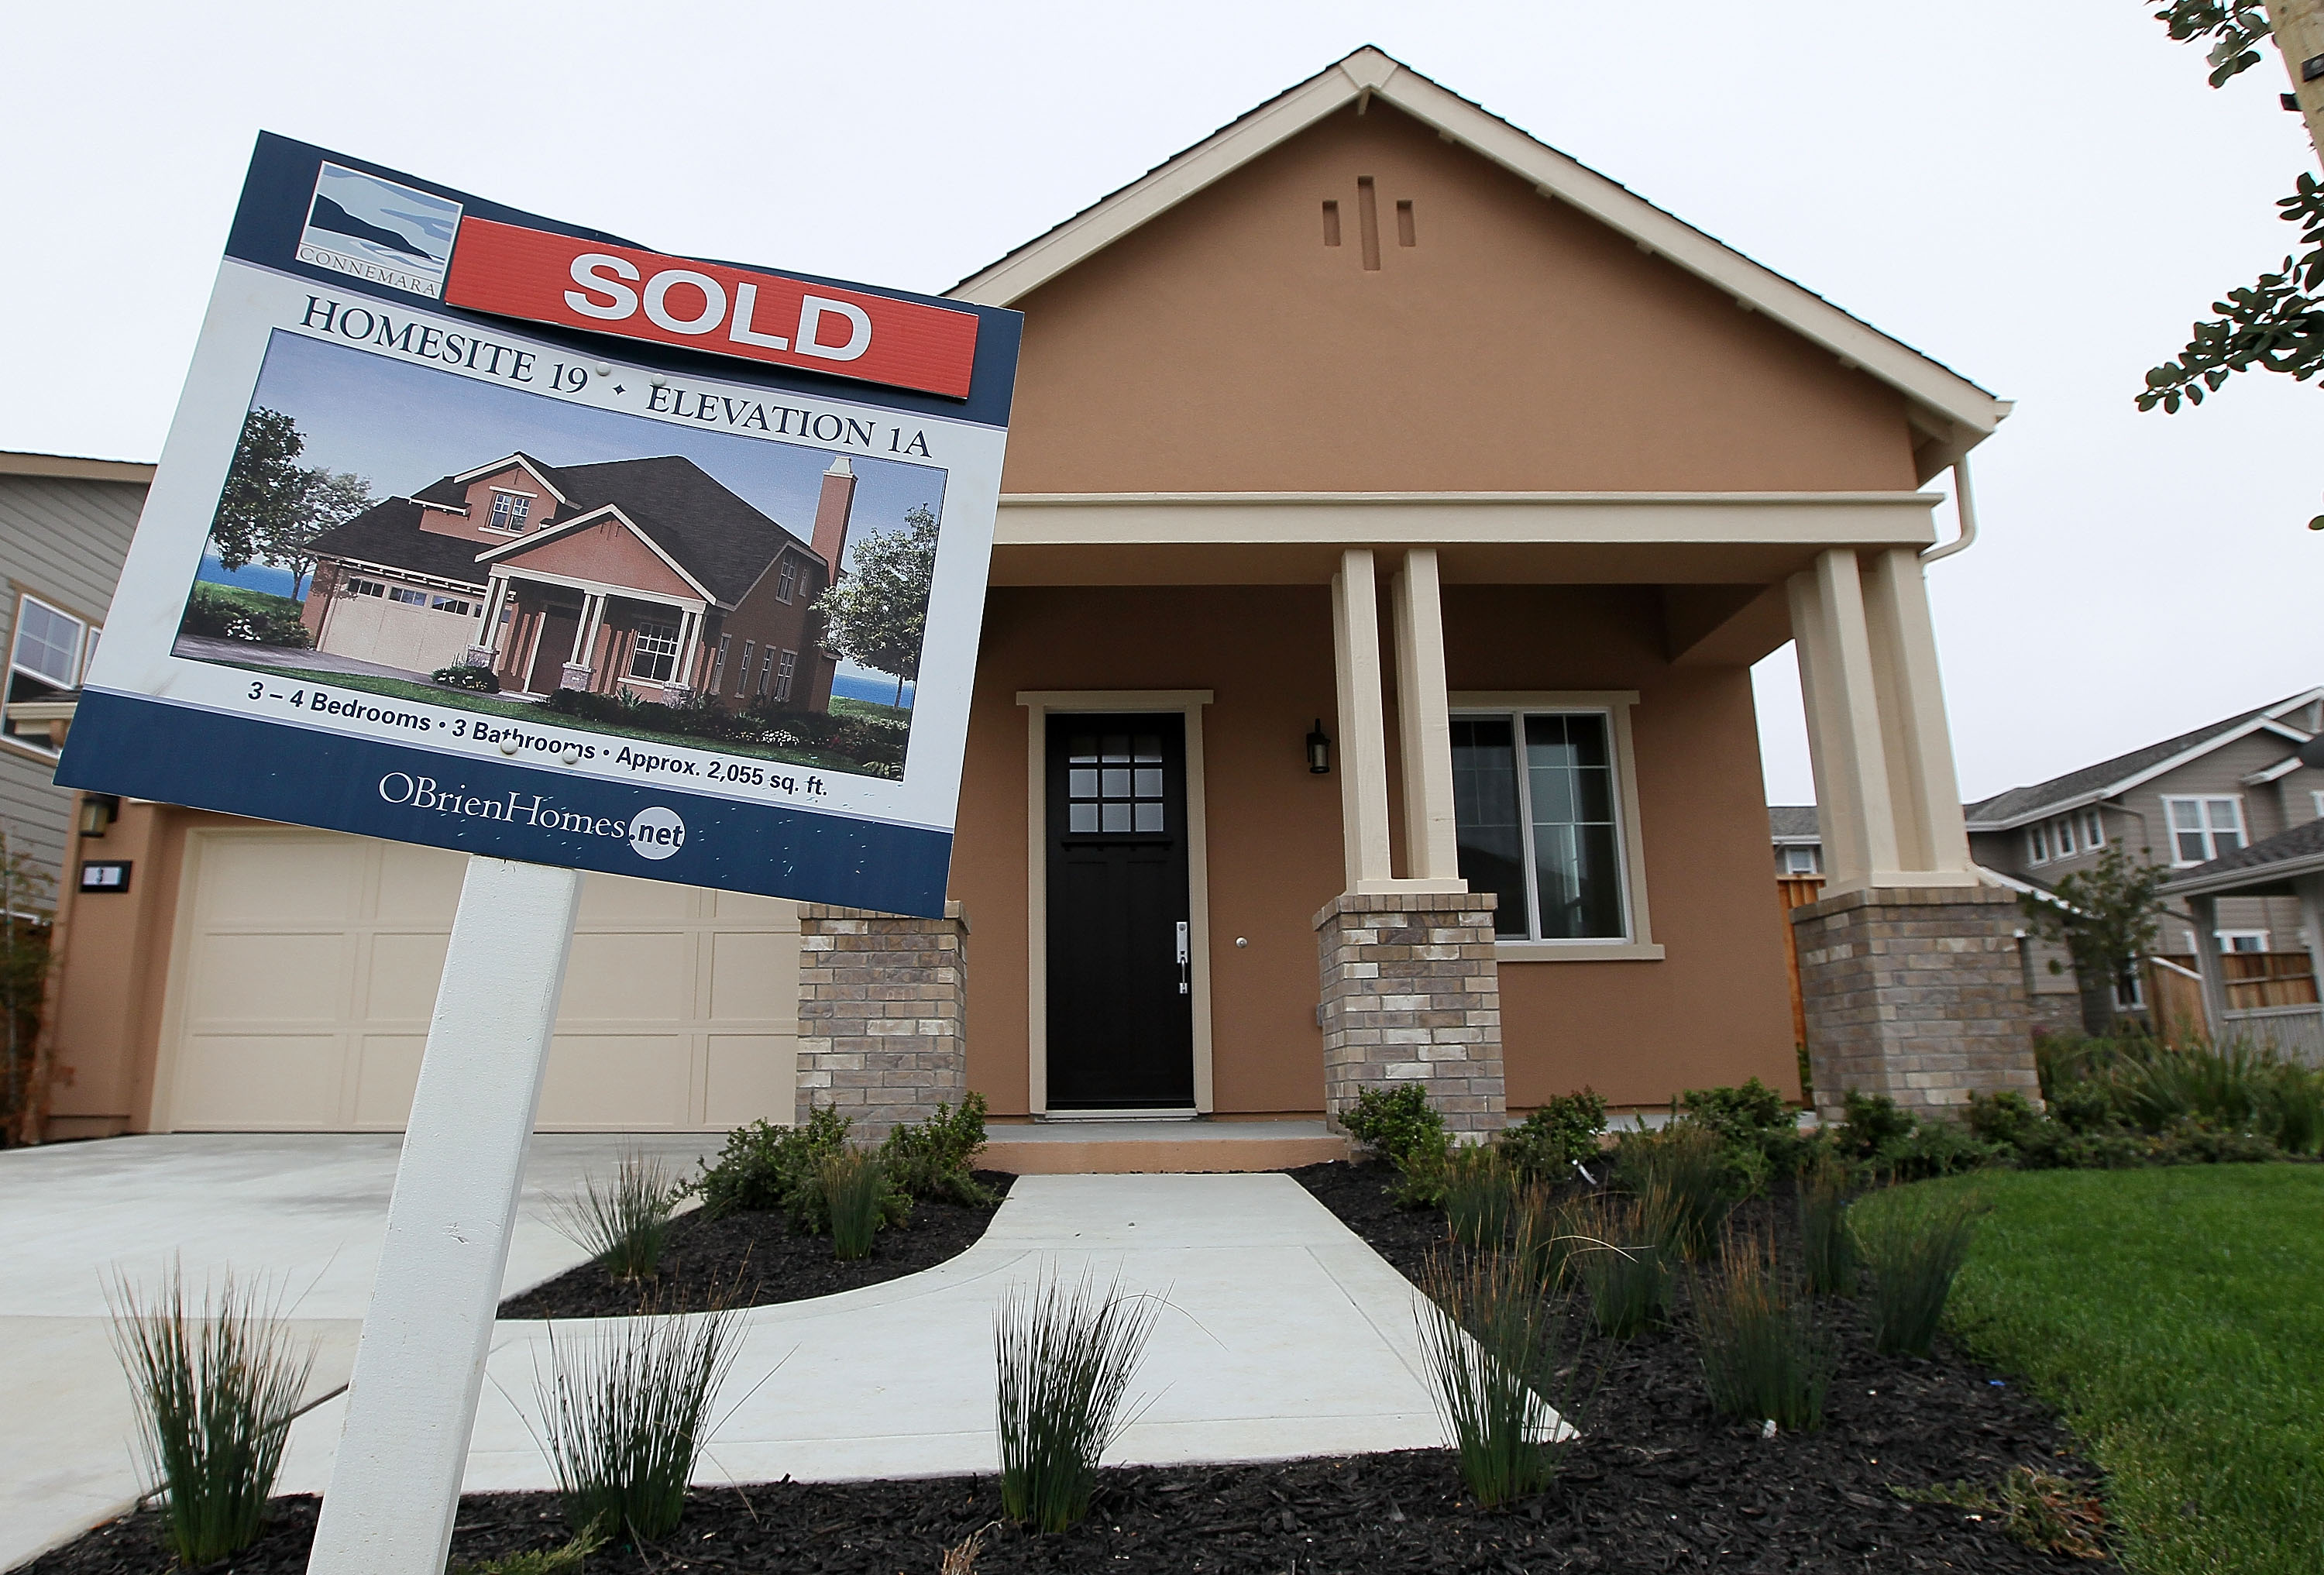 housing market map shows states with fastest growing demand